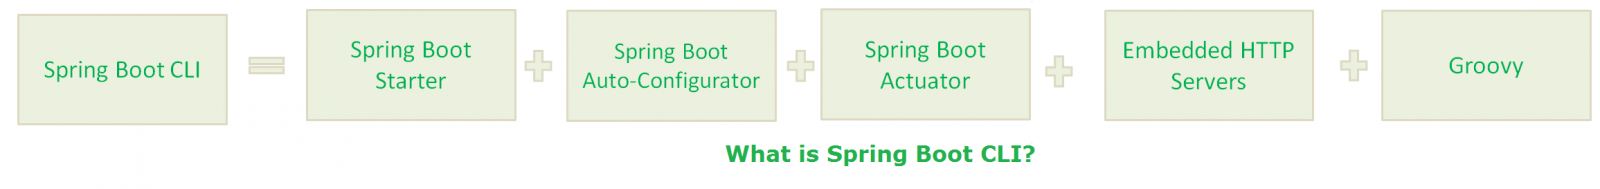 what is spring boot cli